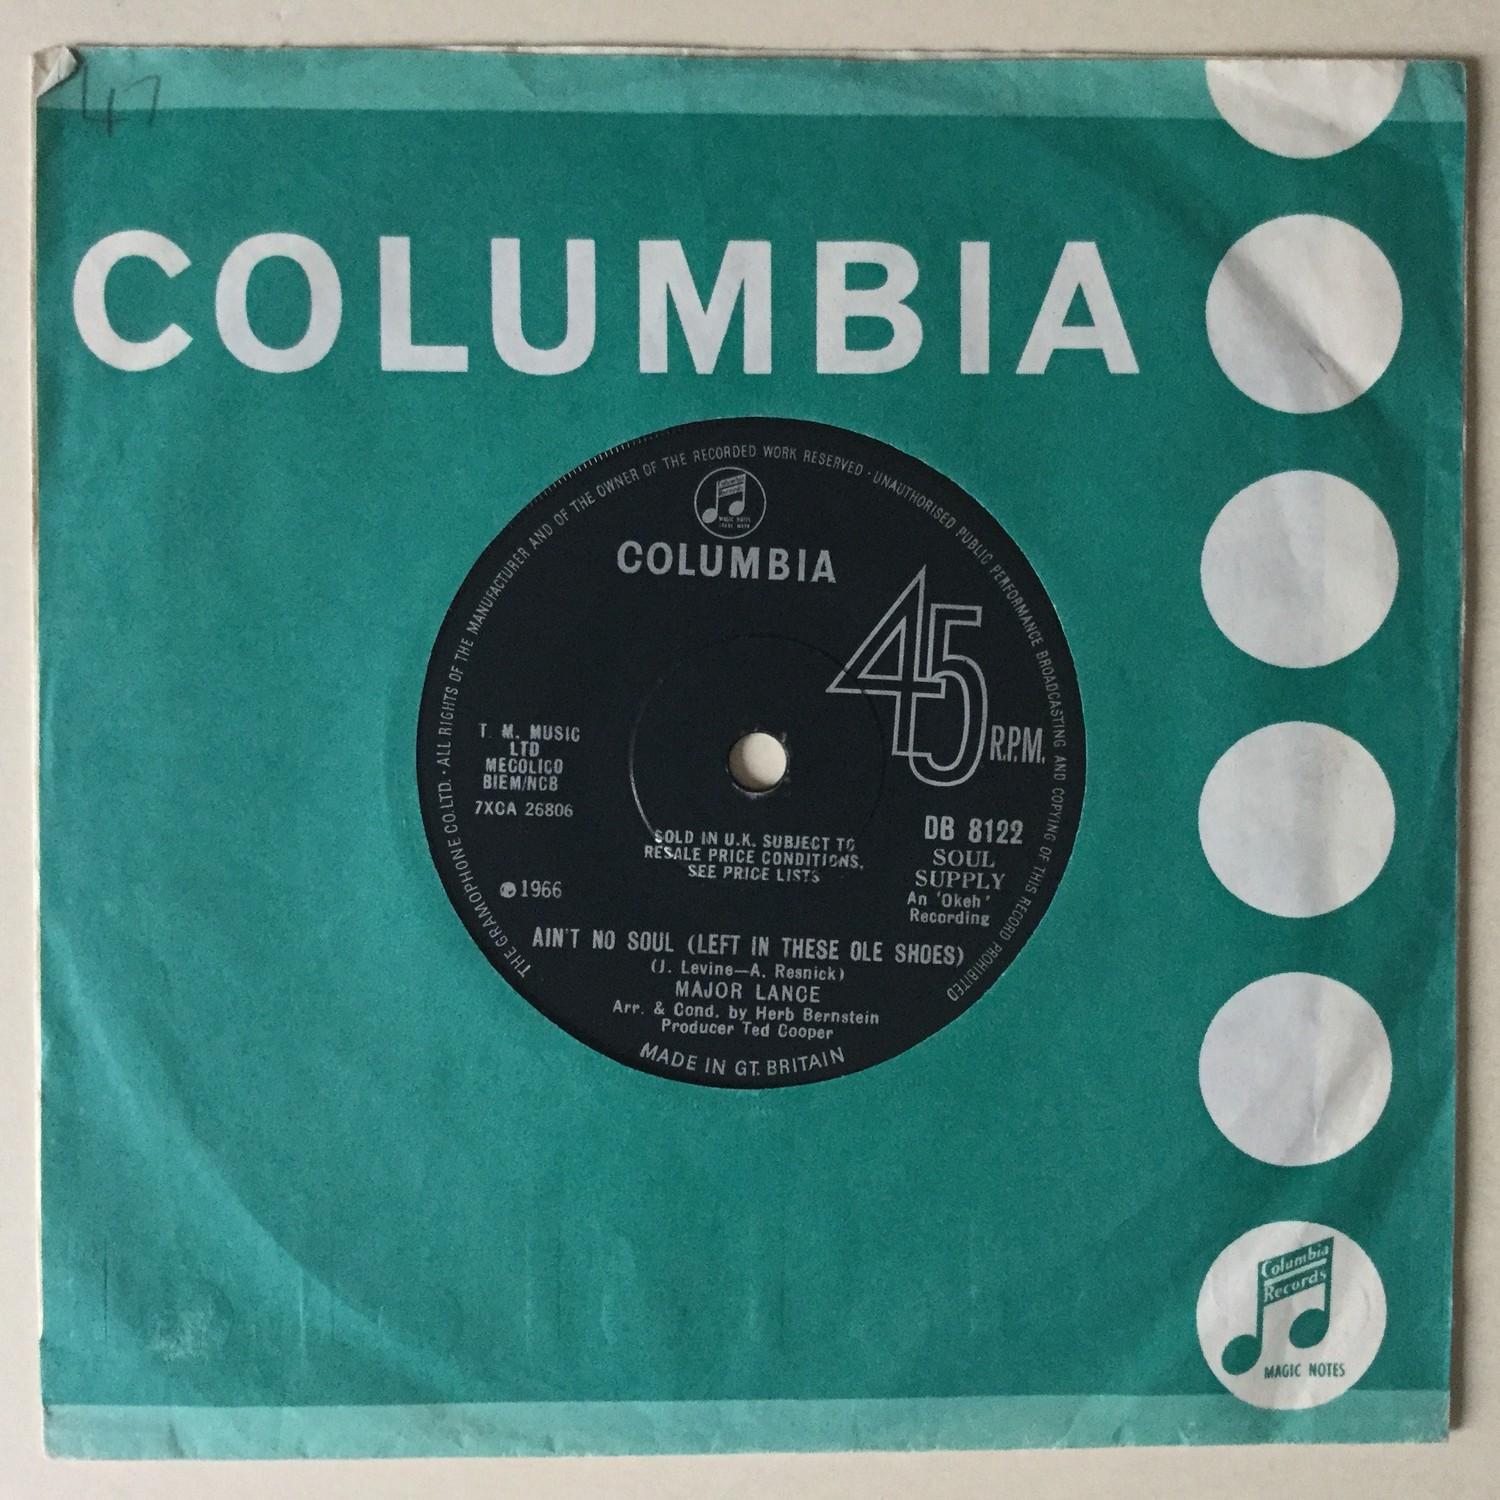 RARE UK COLUMBIA 7? - MAJOR LANCE - ?AIN?T NO SOUL (LEFT IN THESE OLD SHOES?). Another great